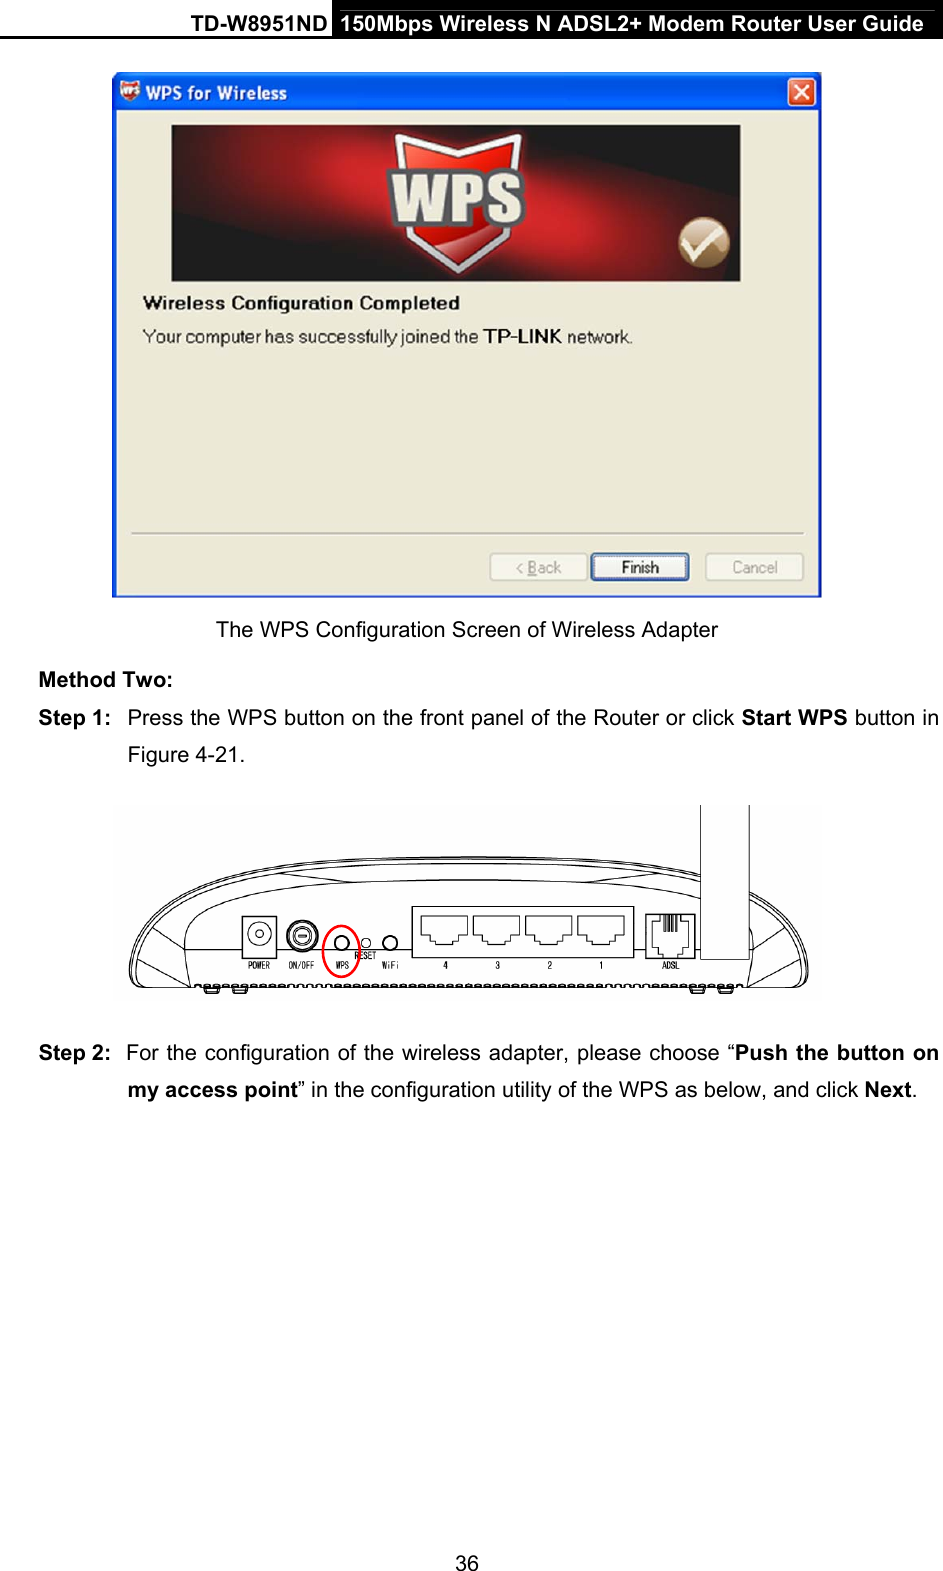 TD-W8951ND  150Mbps Wireless N ADSL2+ Modem Router User Guide  The WPS Configuration Screen of Wireless Adapter   Method Two: Step 1:  Press the WPS button on the front panel of the Router or click Start WPS button in Figure 4-21.  Step 2:  For the configuration of the wireless adapter, please choose “Push the button on my access point” in the configuration utility of the WPS as below, and click Next.  36 